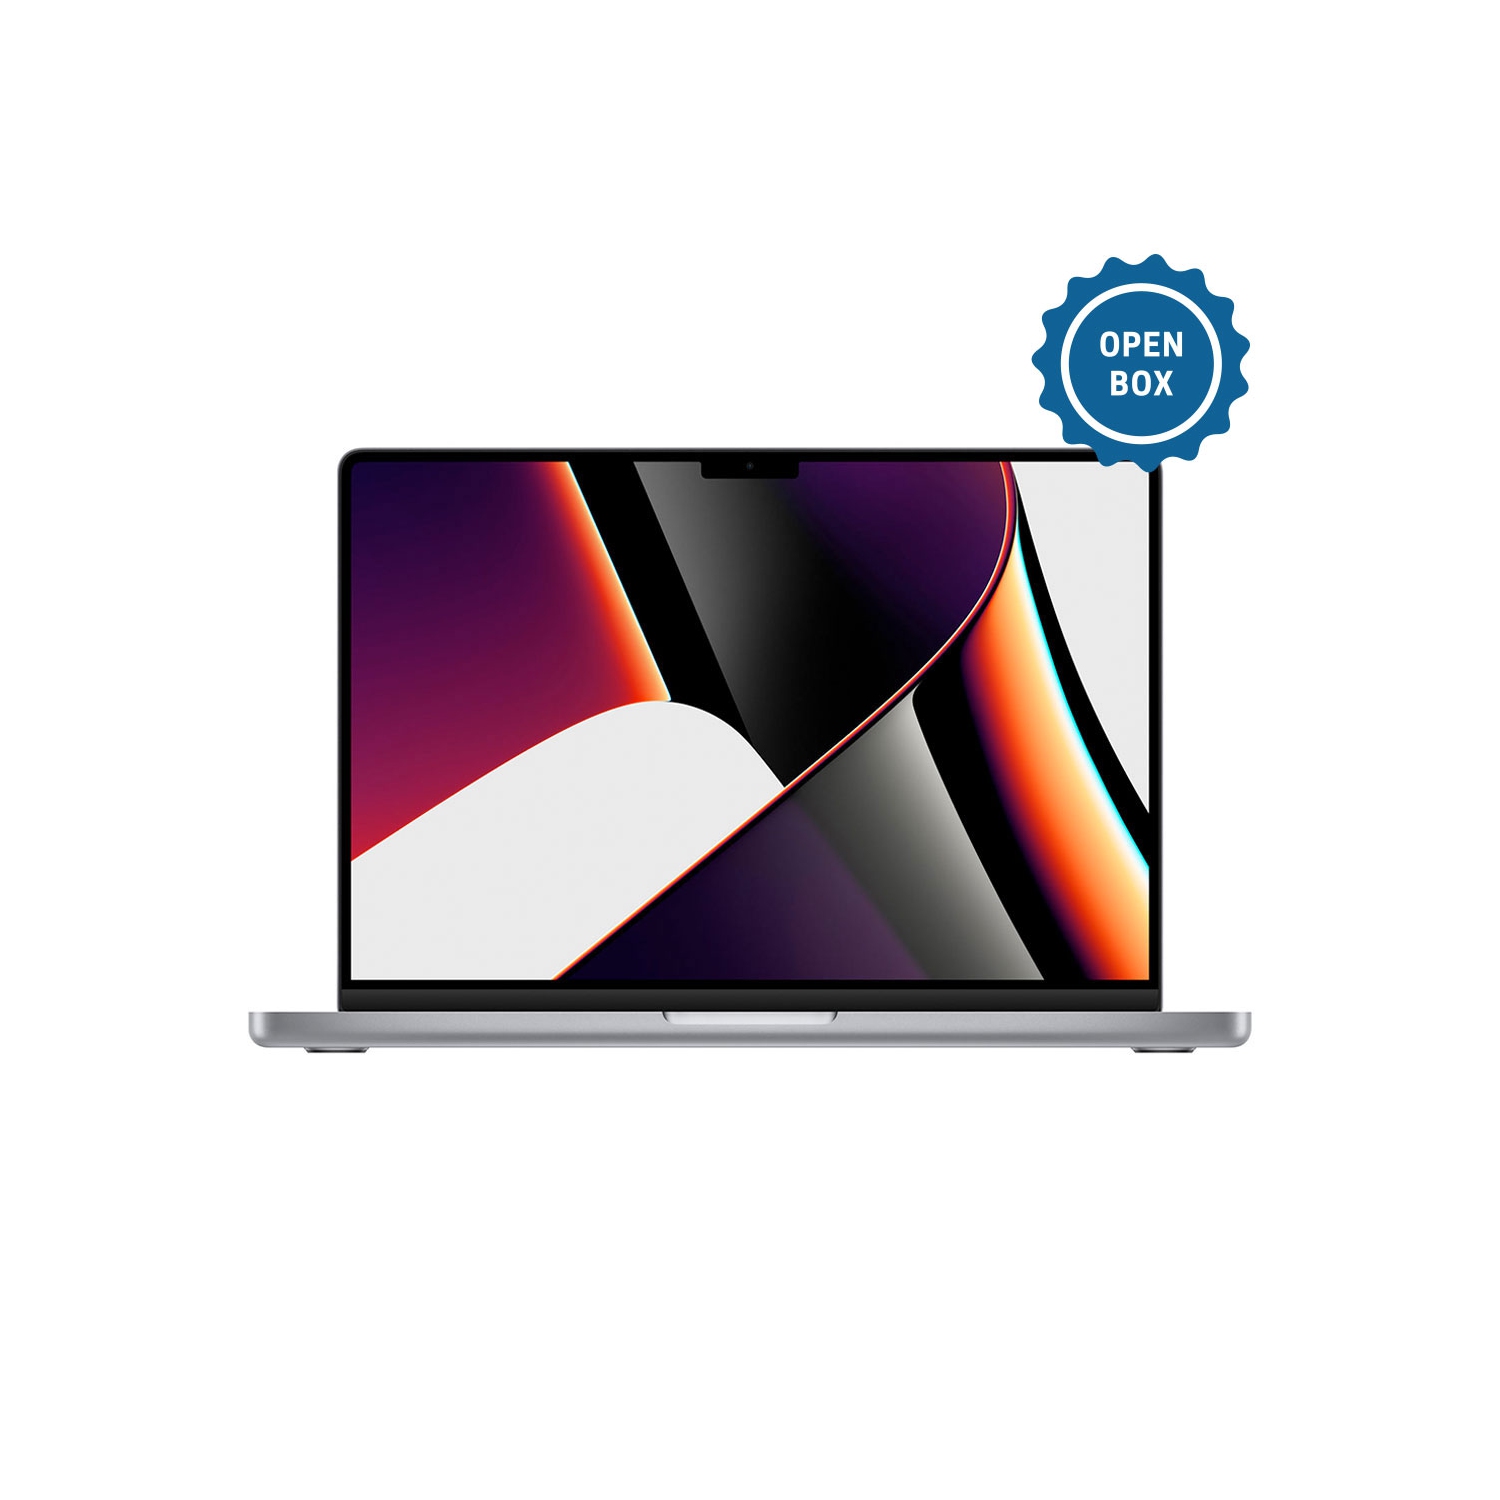 Apple MacBook Pro 14.2-inch / M1 Pro Chip / 8-Core CPU and 14-Core GPU / 16GB Memory / 512GB SSD / Space Gray (Apple Care+ Expires OCTOBER 2024) French - Open Box